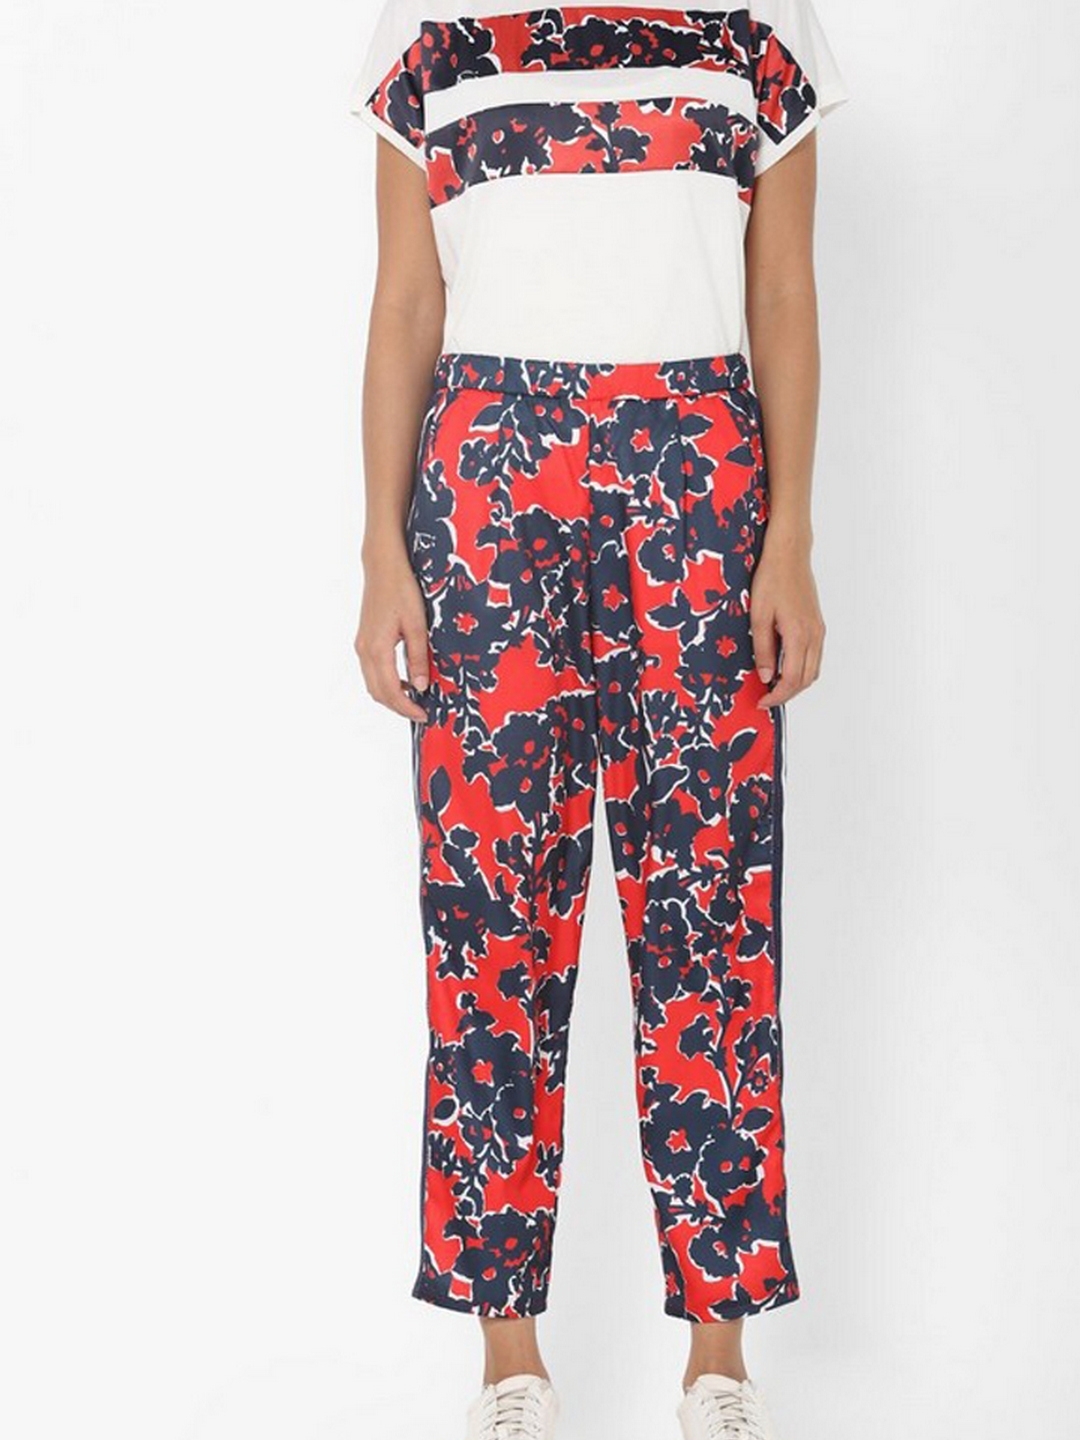 Spring Blooms: Floral Palazzo Pants for Fashionable Ladies & Girls